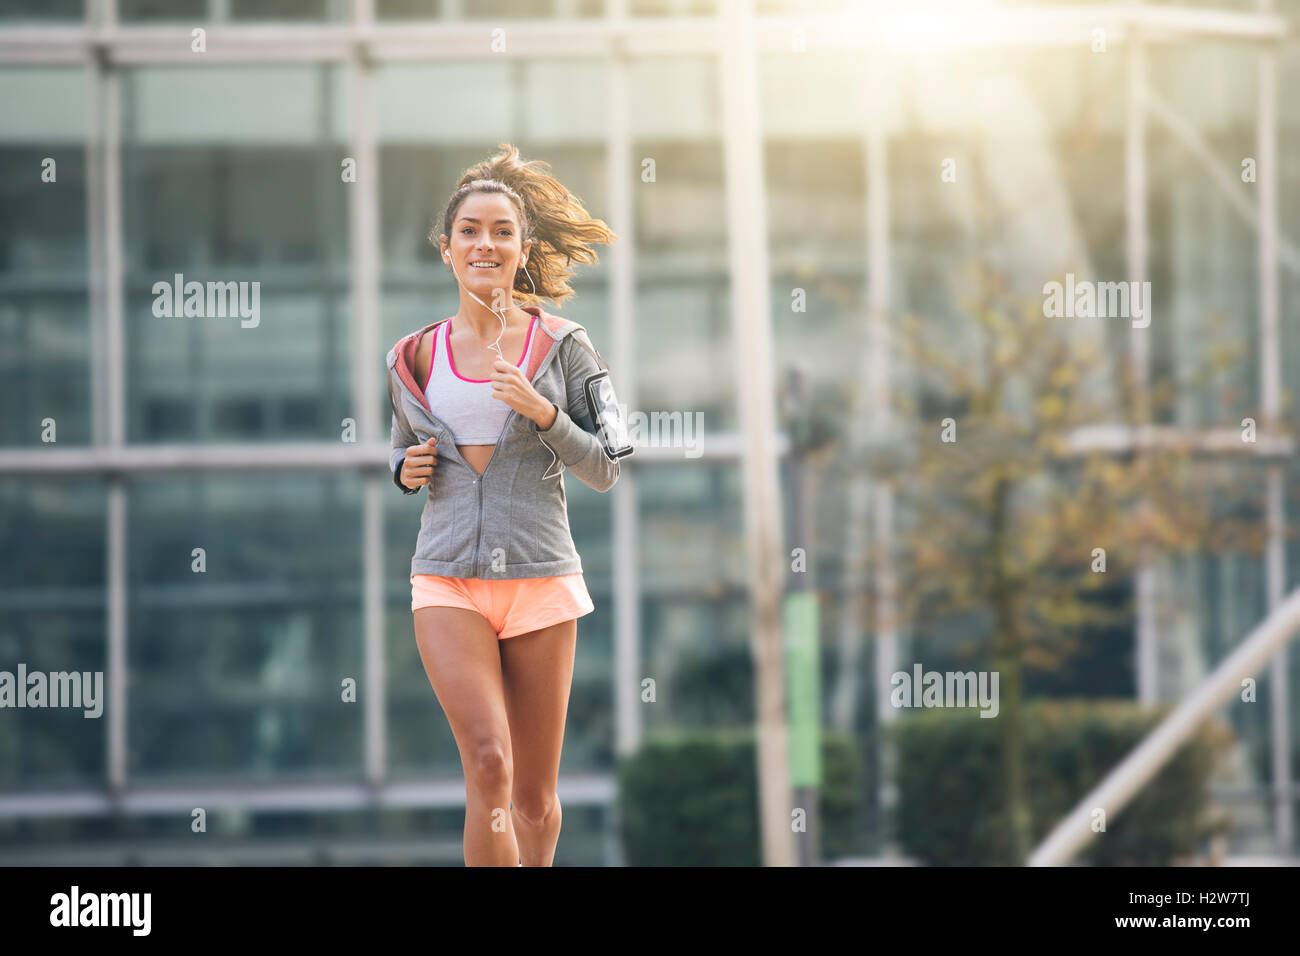 Young woman running in the city street Stock Photo